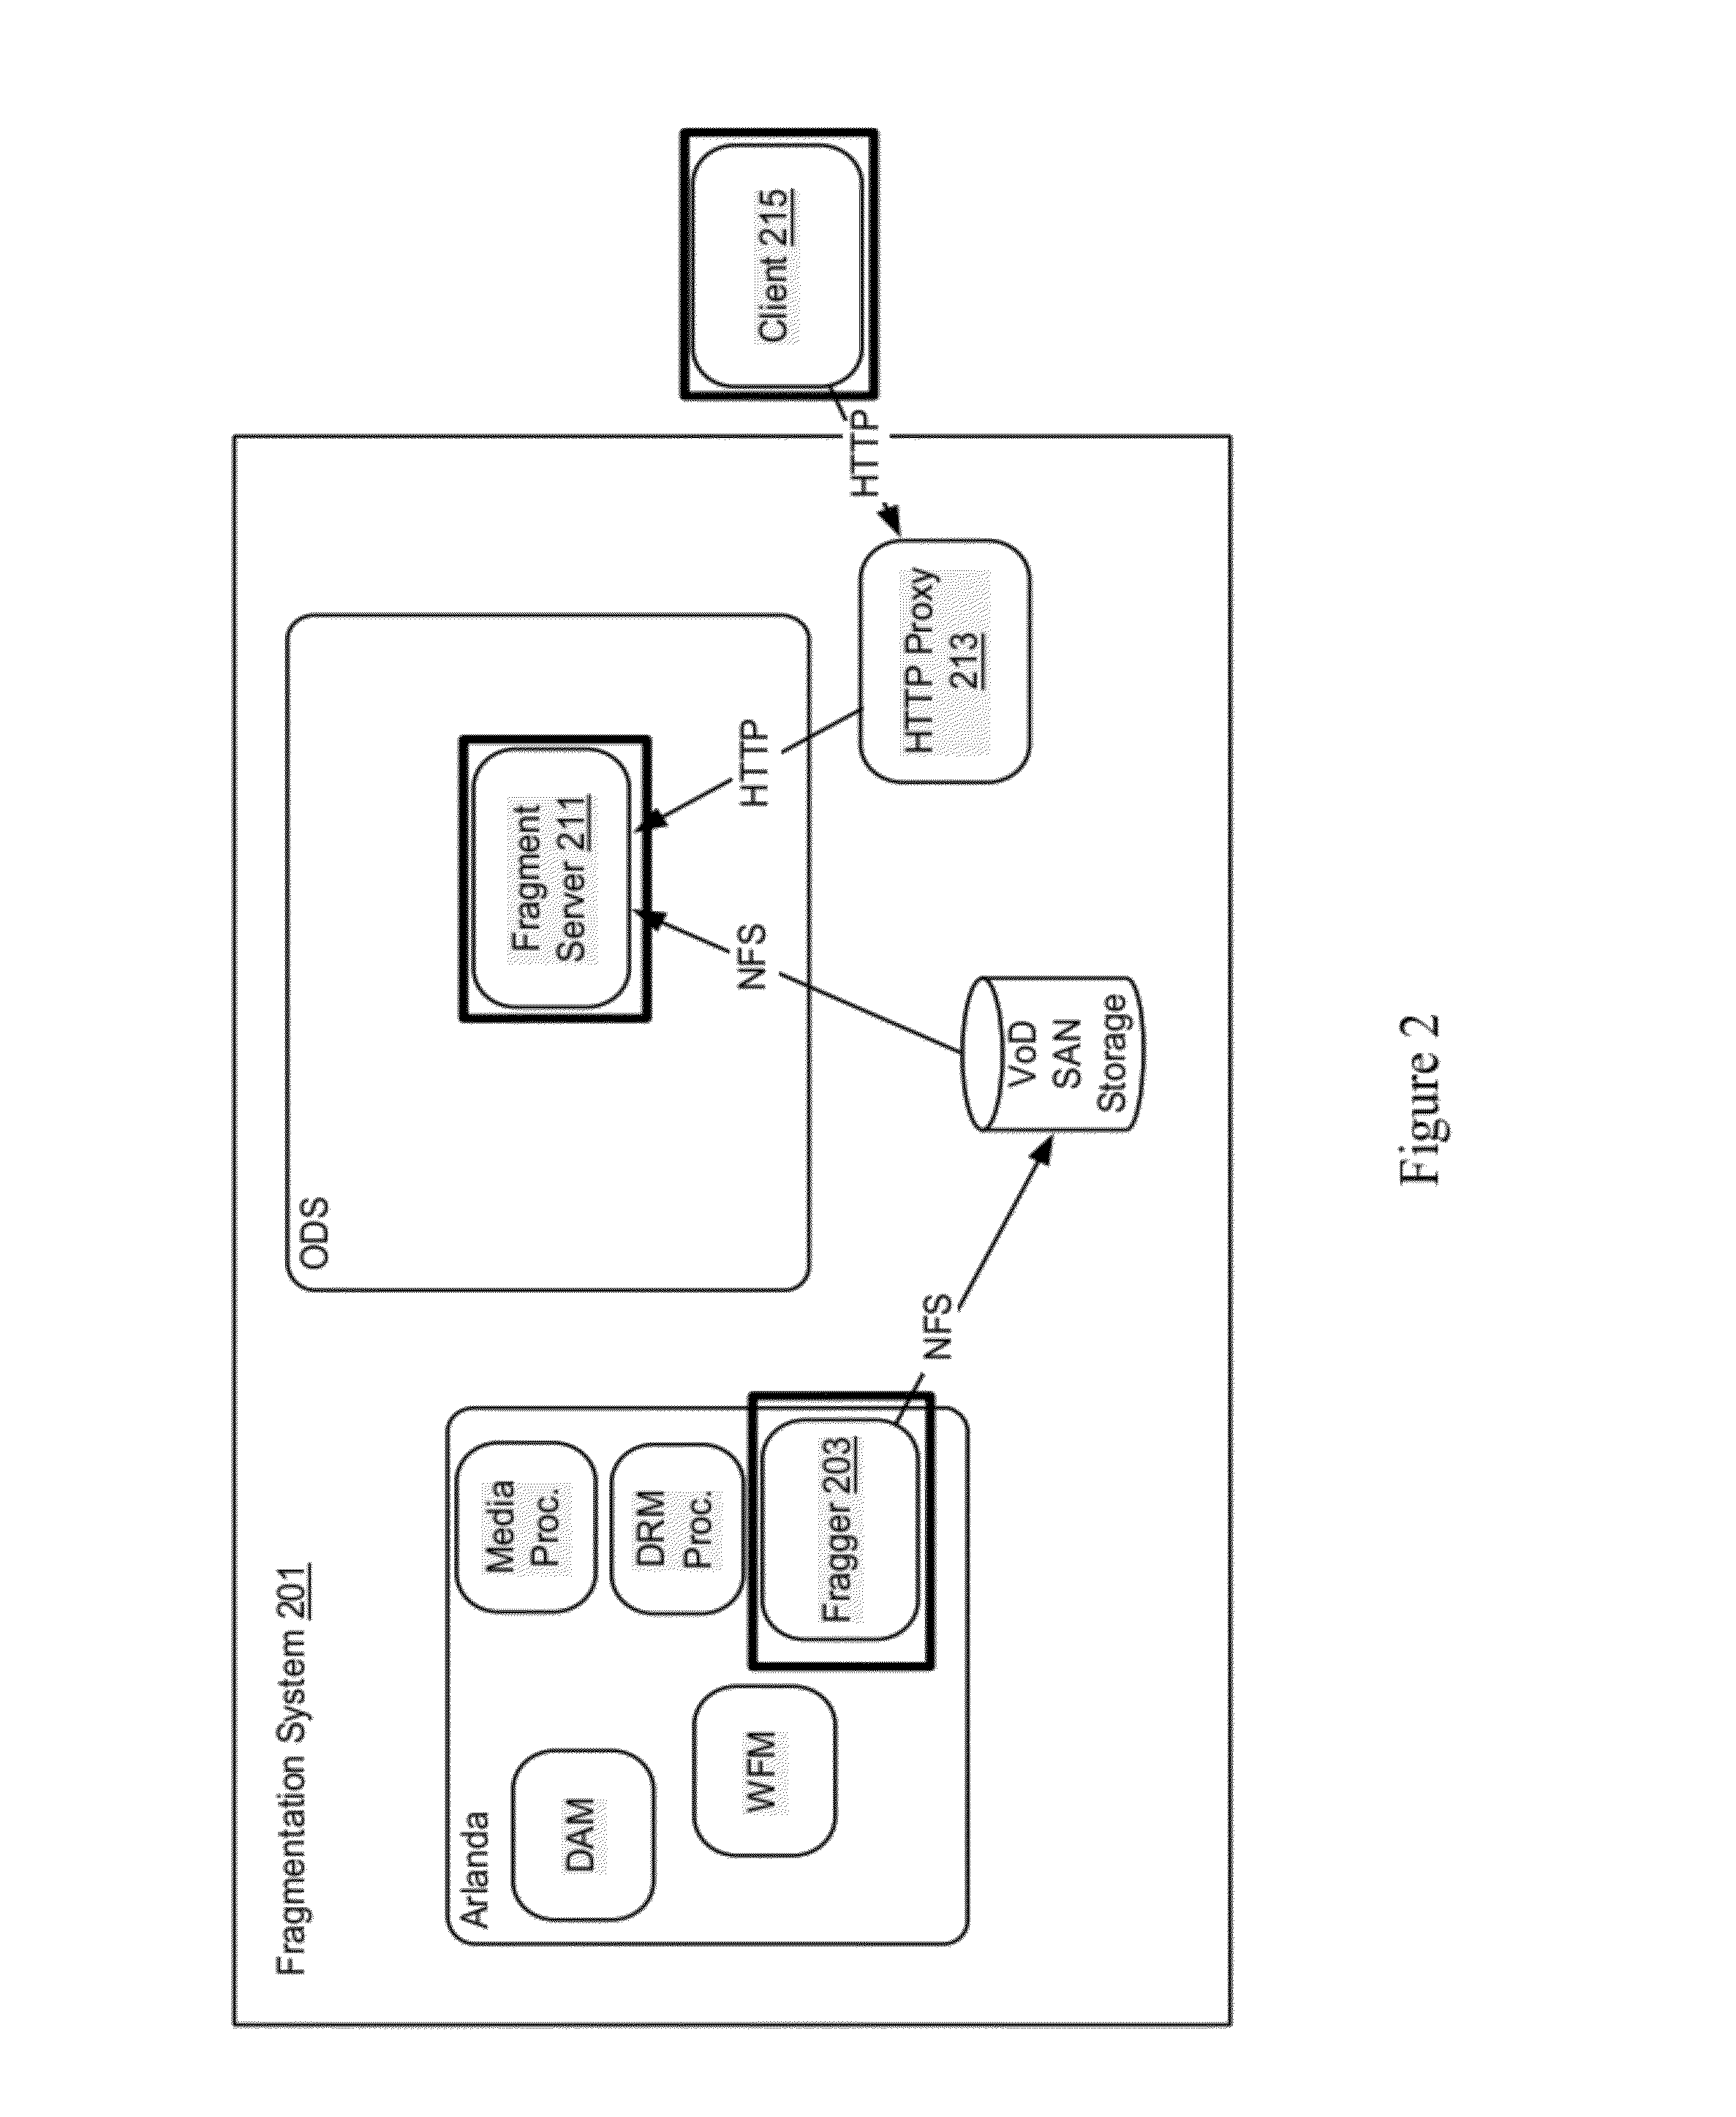 User and device authentication for media services